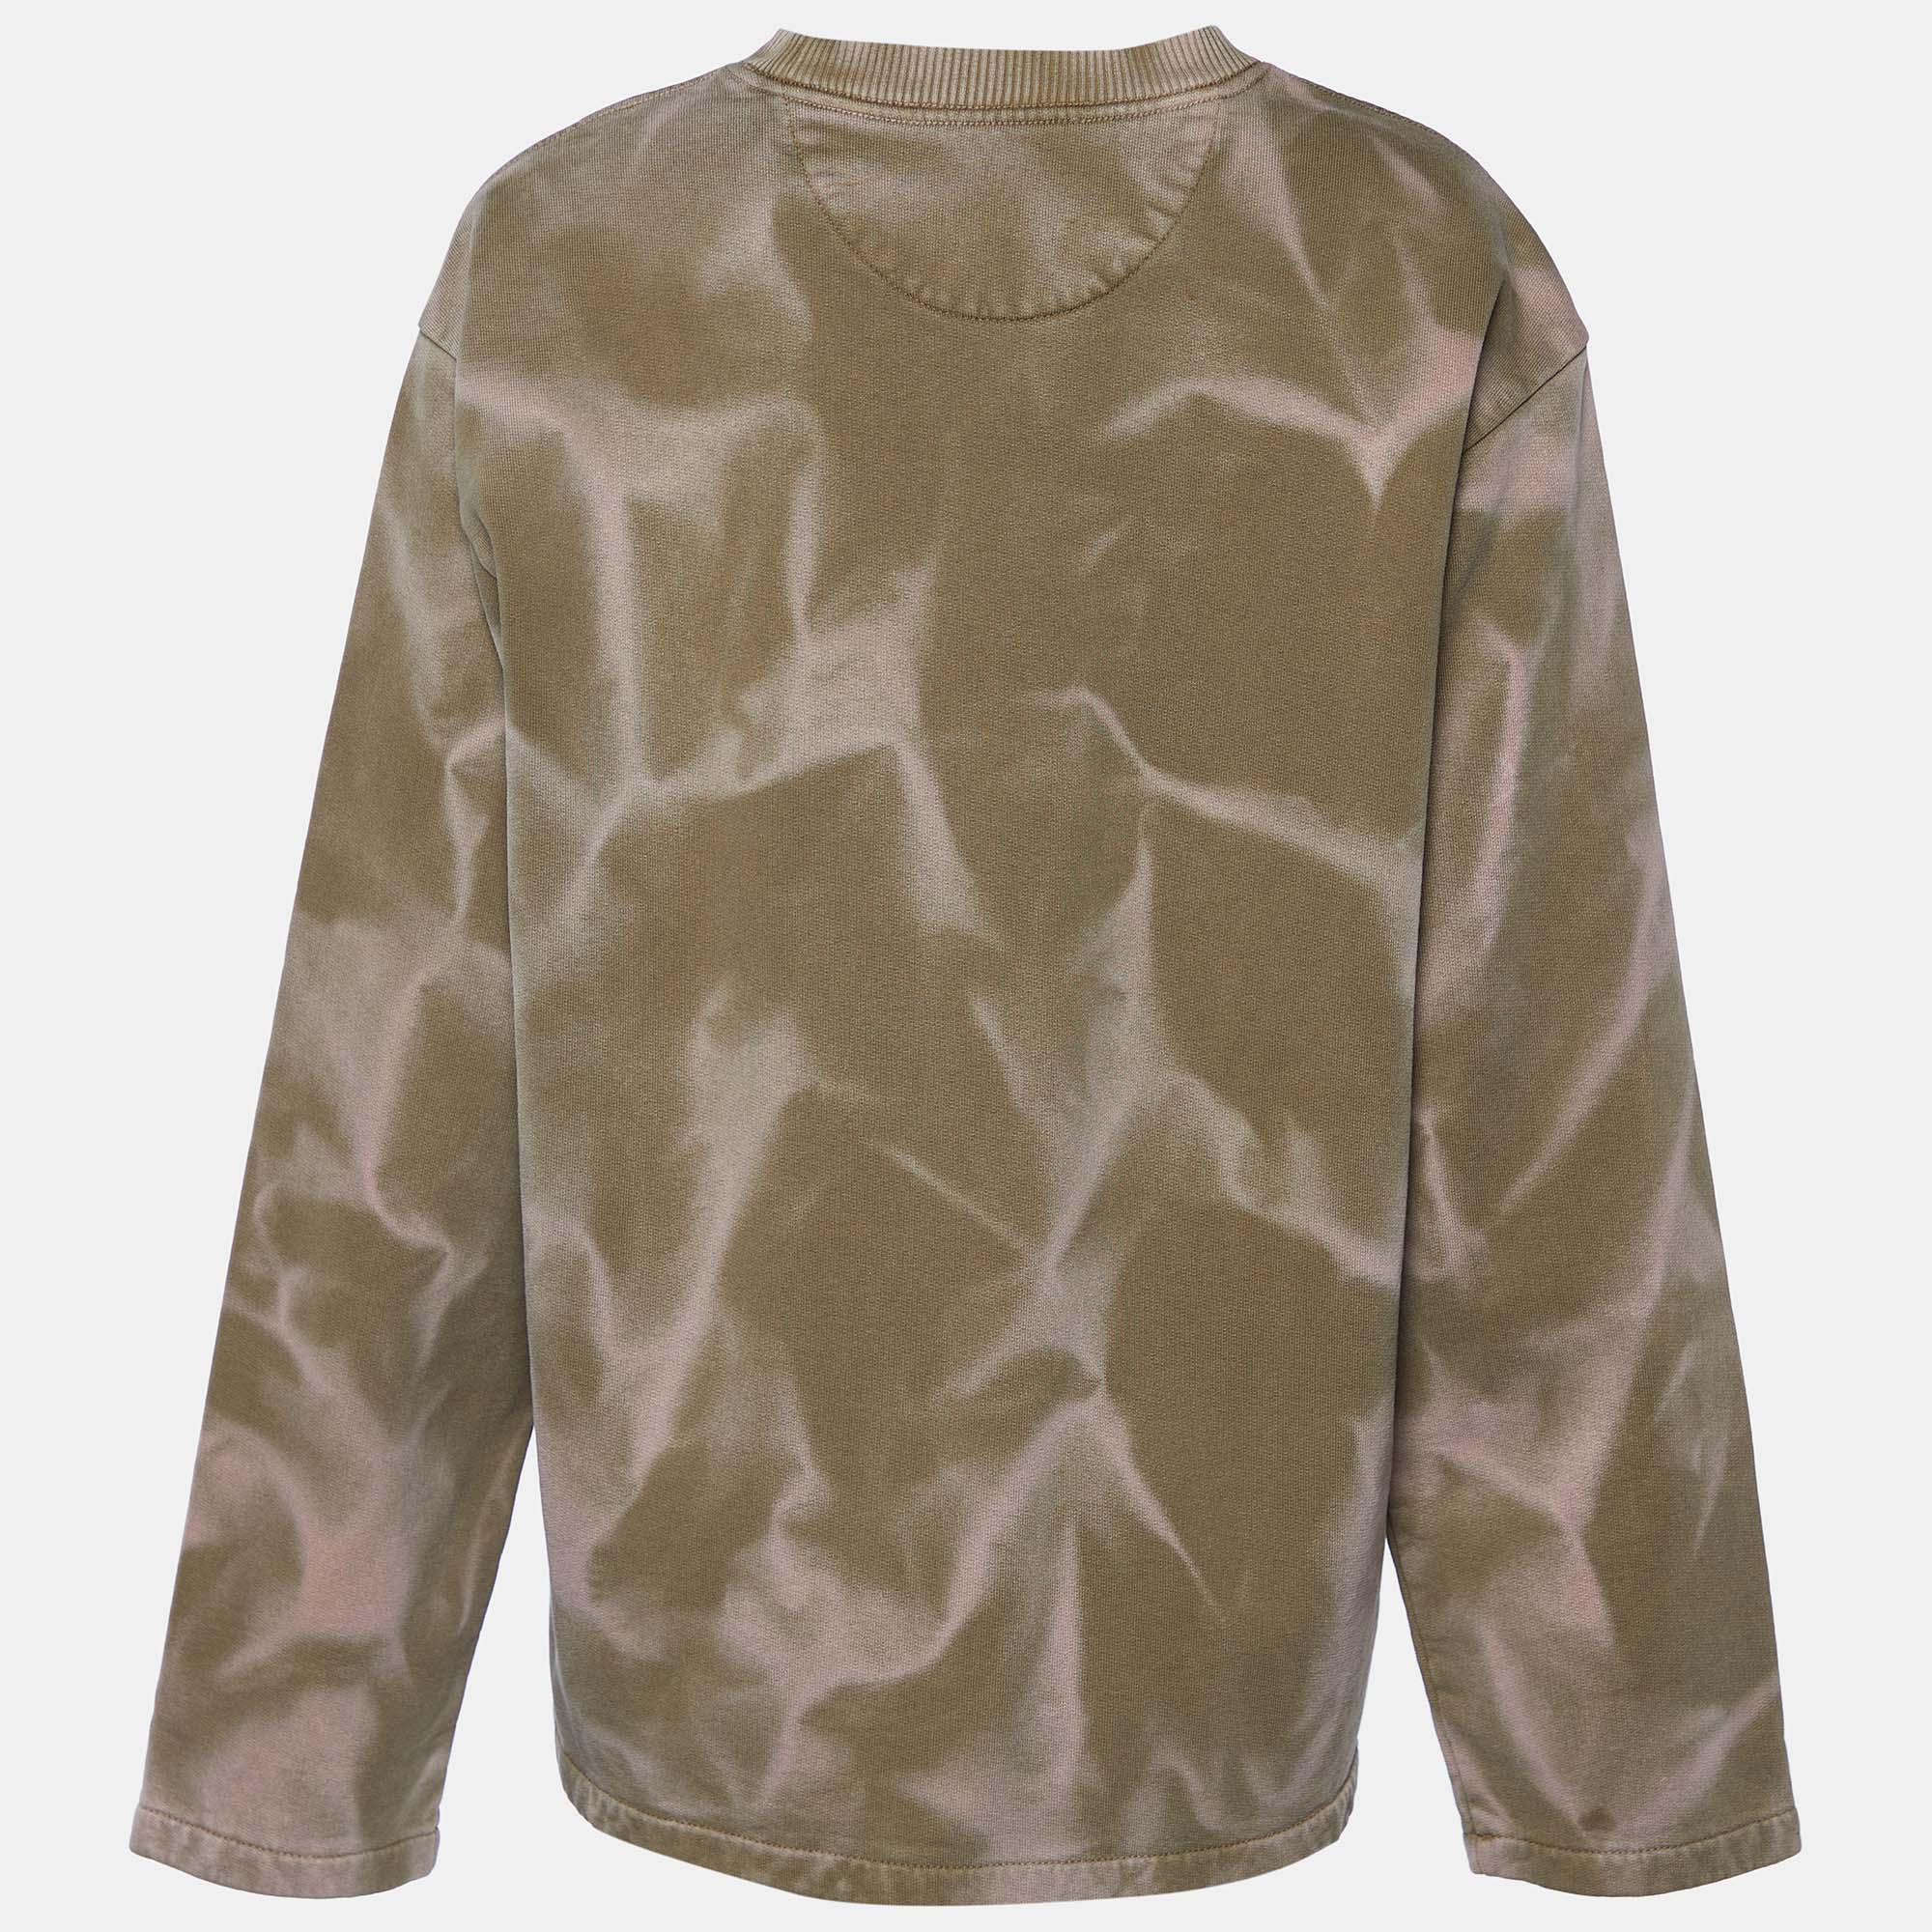 

Acne Studios Brown & Pink Knit Tie Dye Oversized Pullover